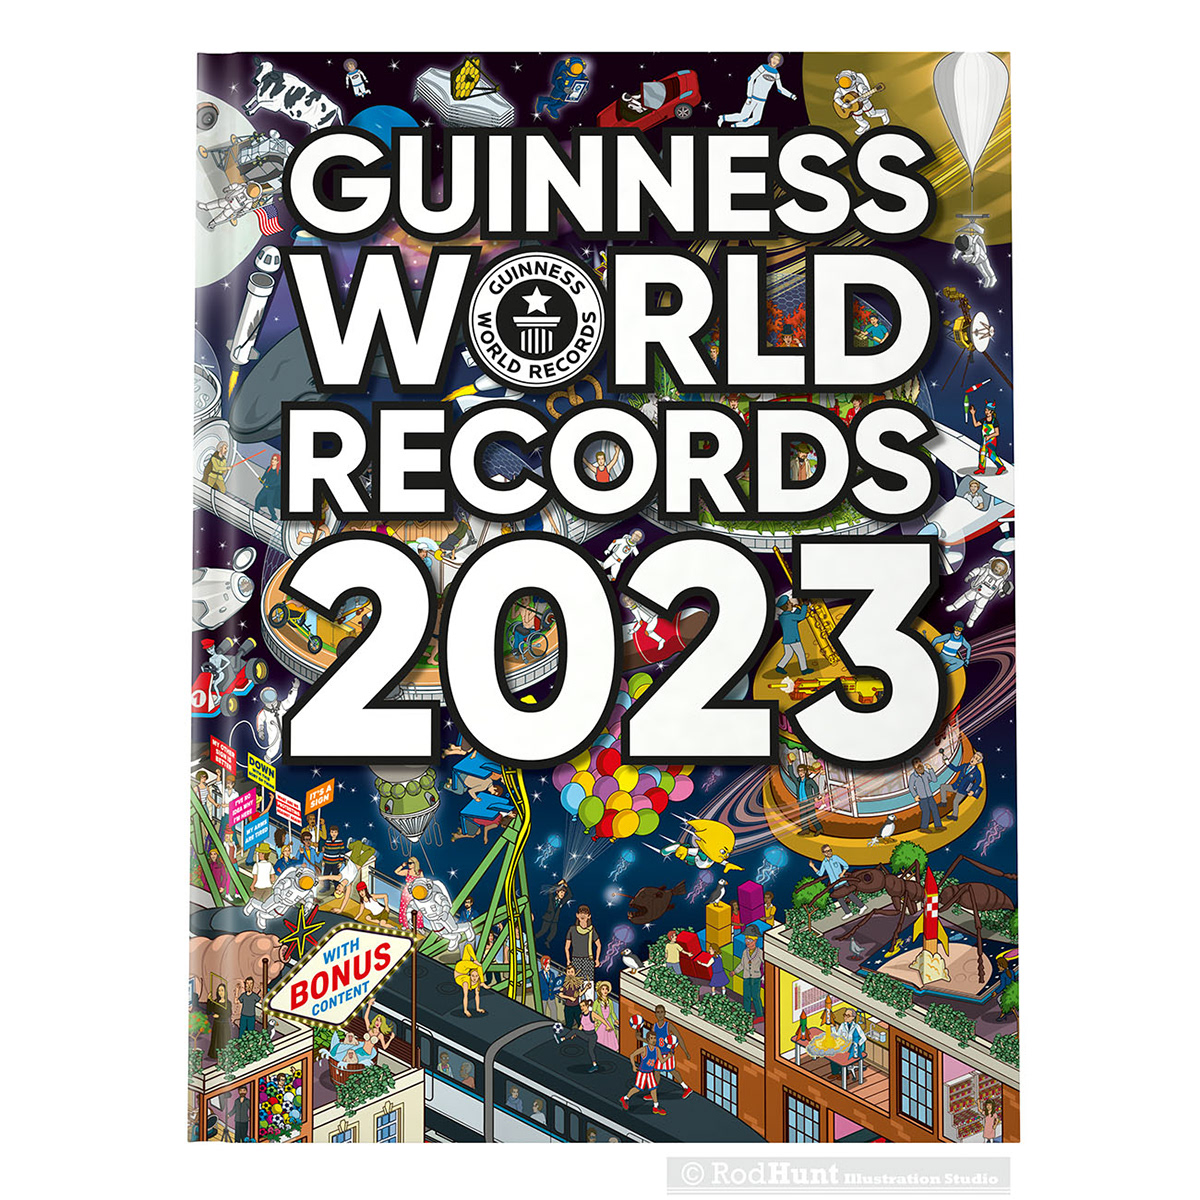 Book cover illustration for Guinness World Records 2023 by Rod Hunt